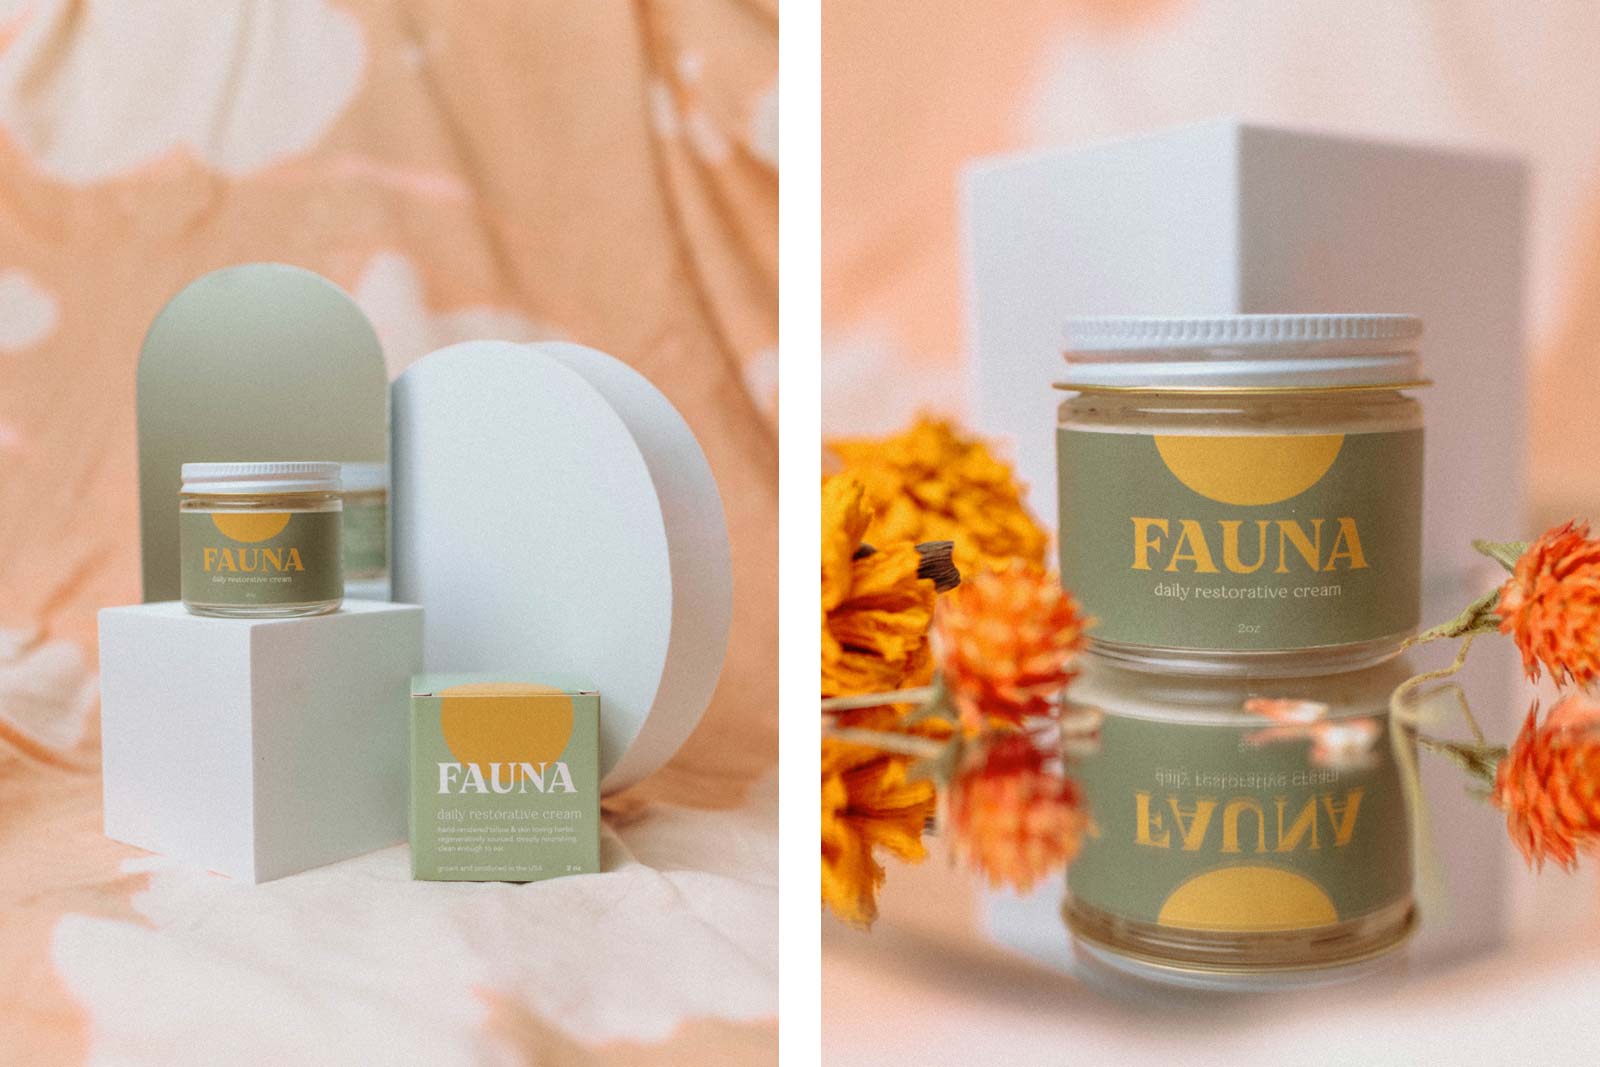 Fauna Daily Restorative Cream - Land to Market Verified - Holiday Gift Guide